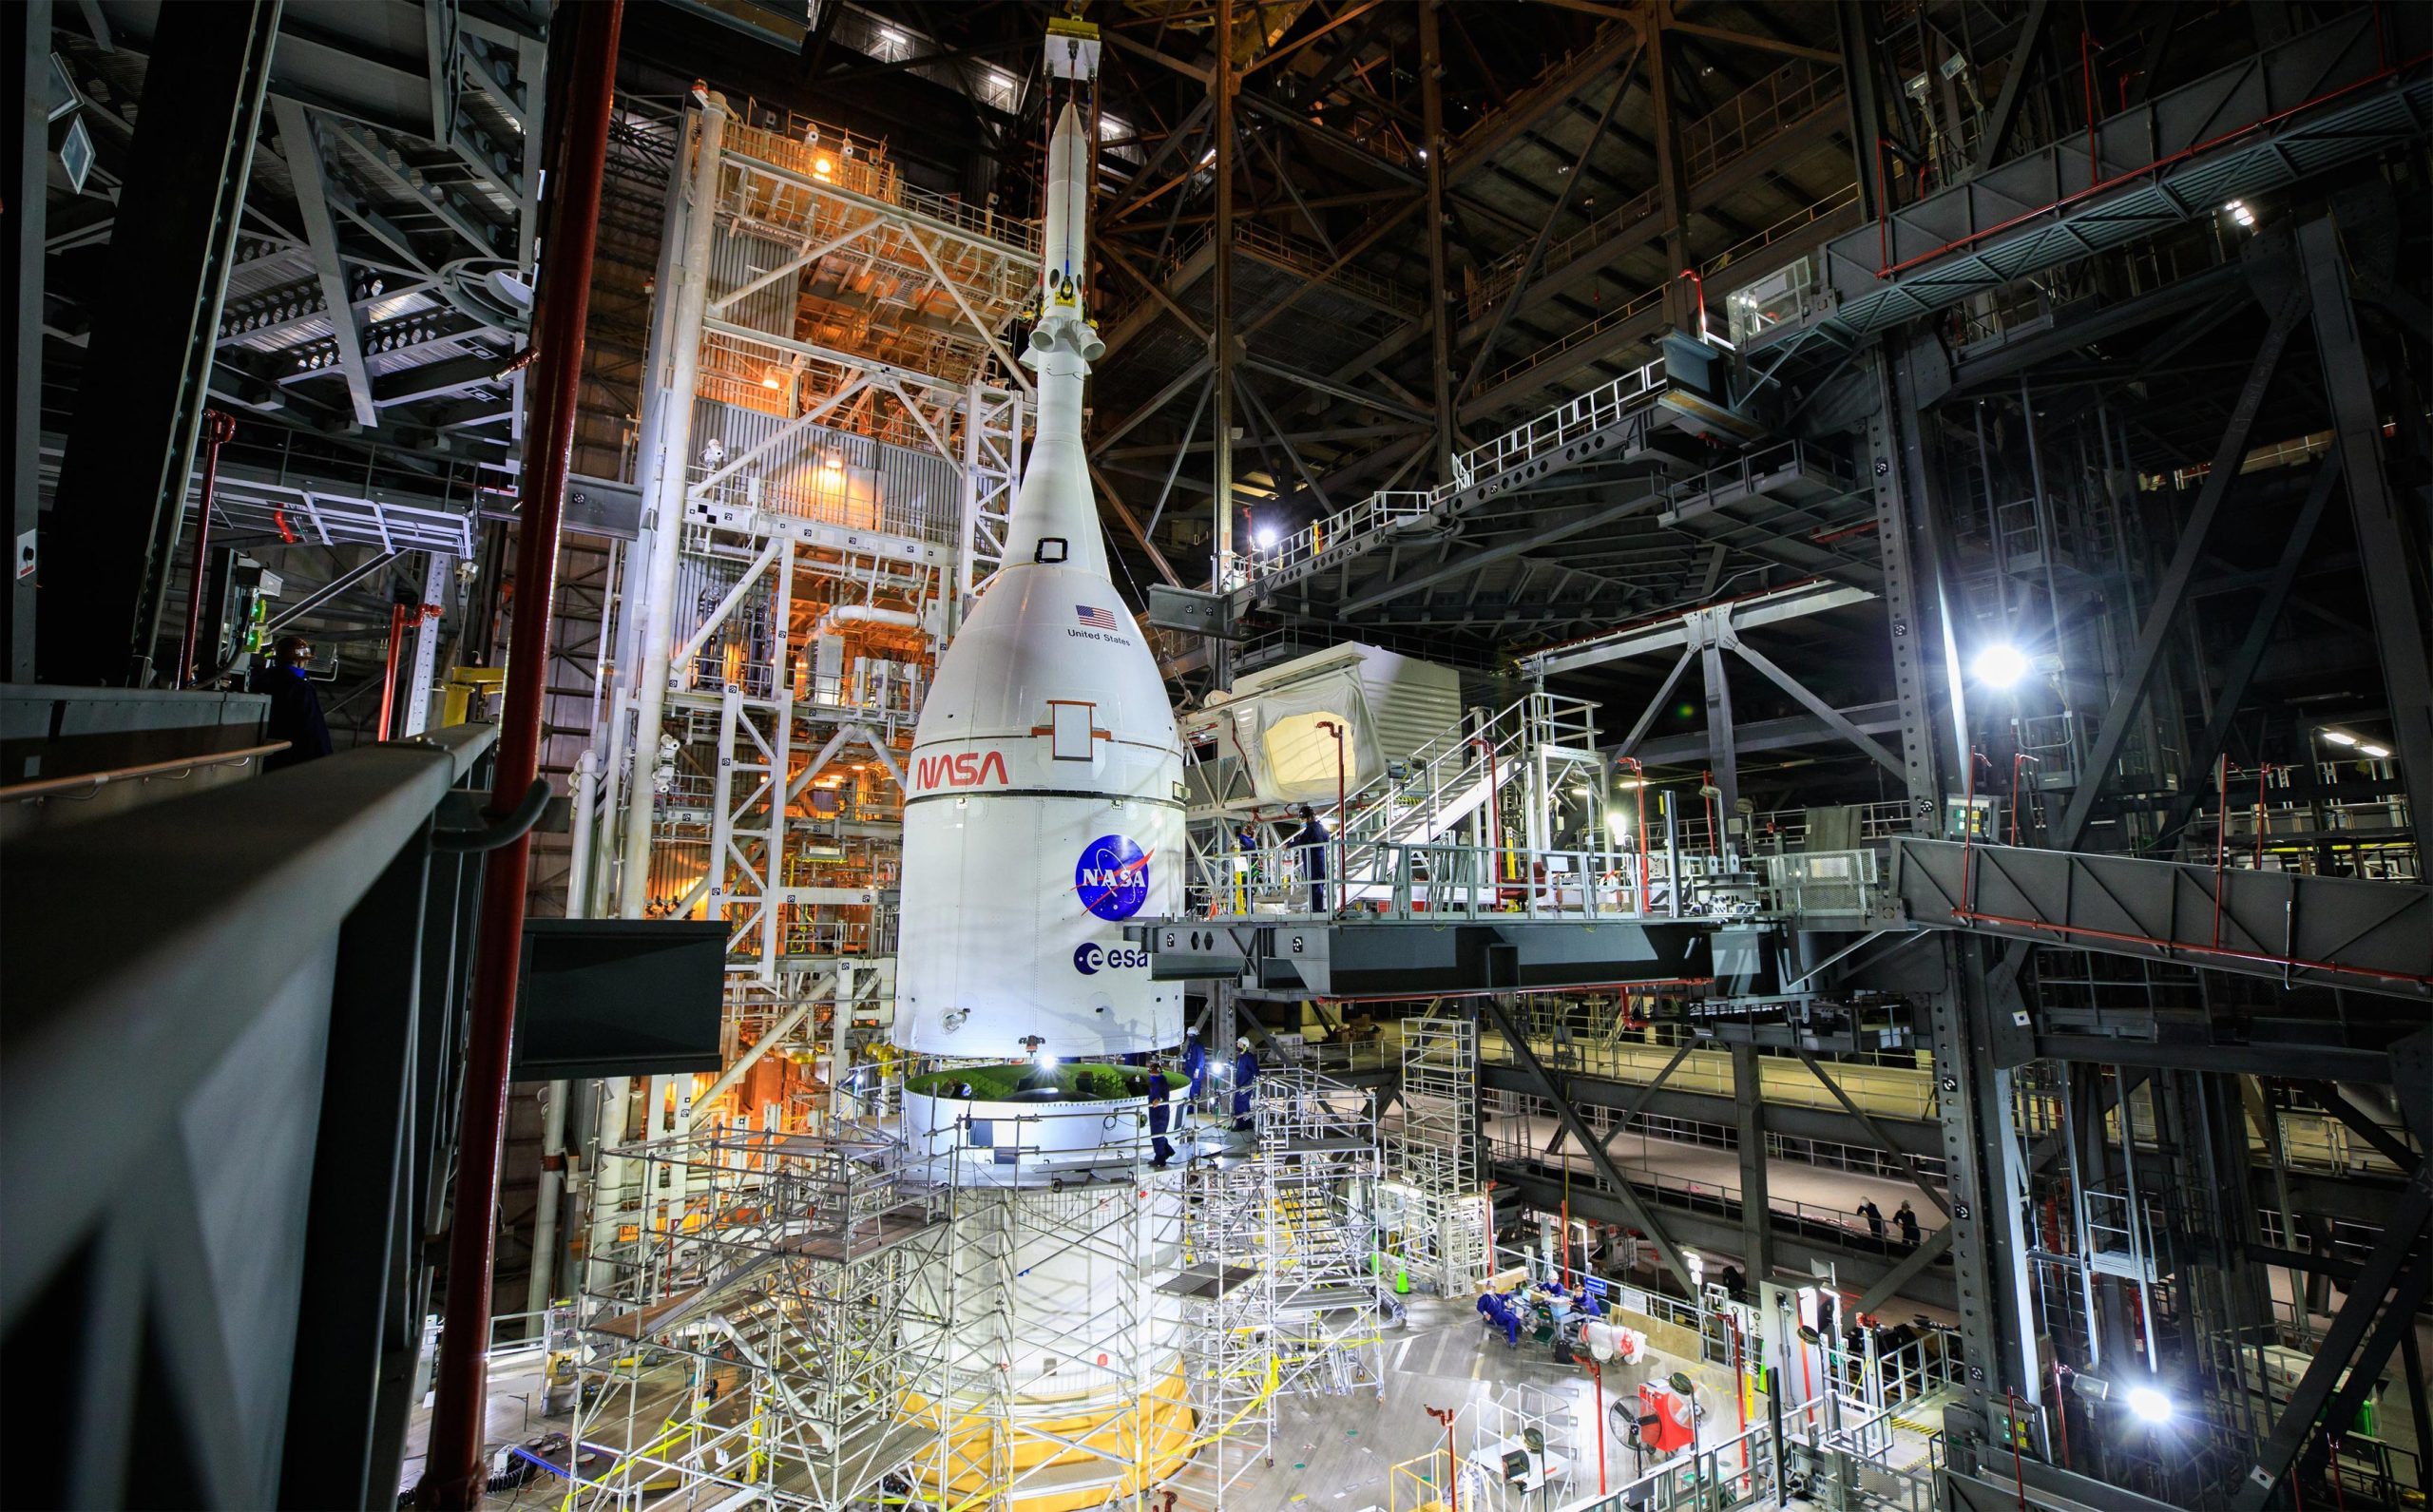 NASA’s Powerful SLS Rocket Fully Stacked for Artemis I Moon Mission – Liftoff for Deep Space in February 2022 - SciTechDaily